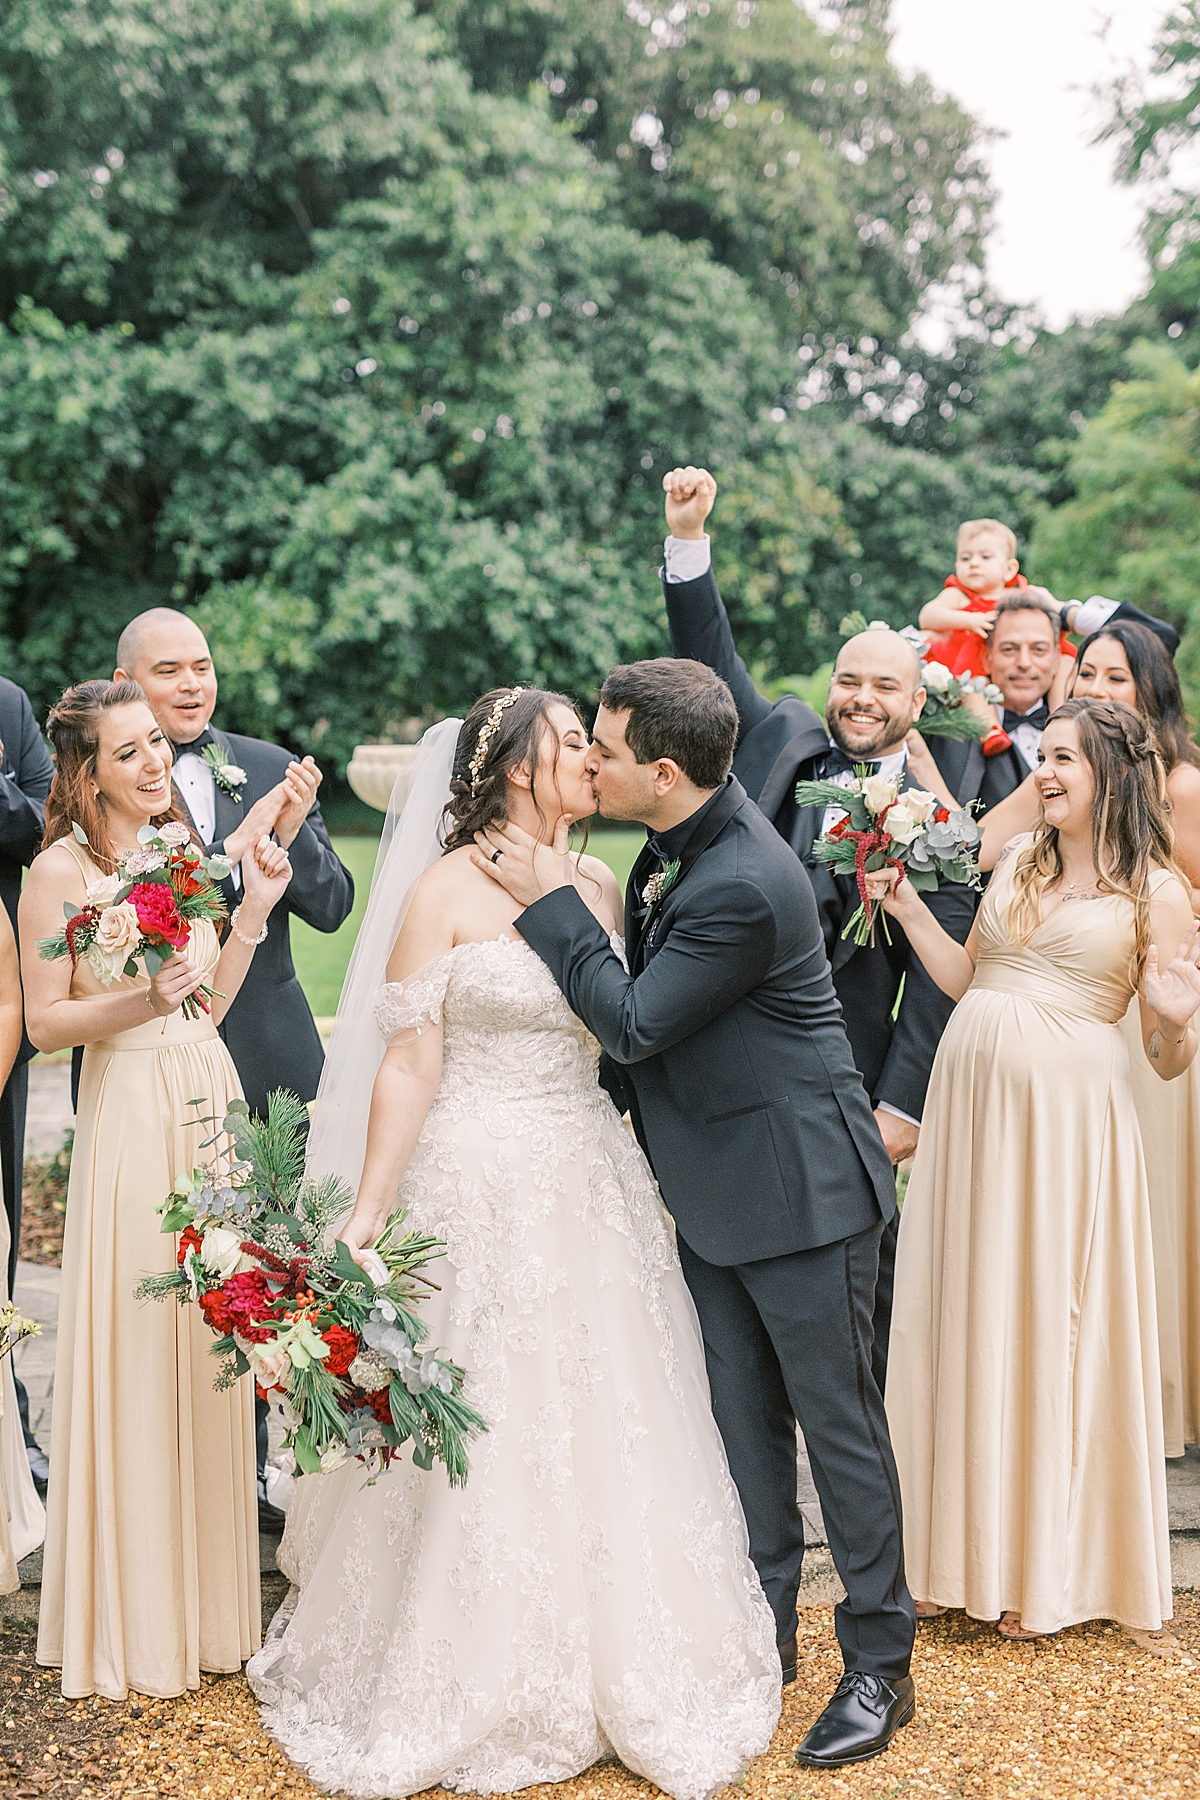 Sofia & Joey sharing a kiss as their wedding party cheers behind them.